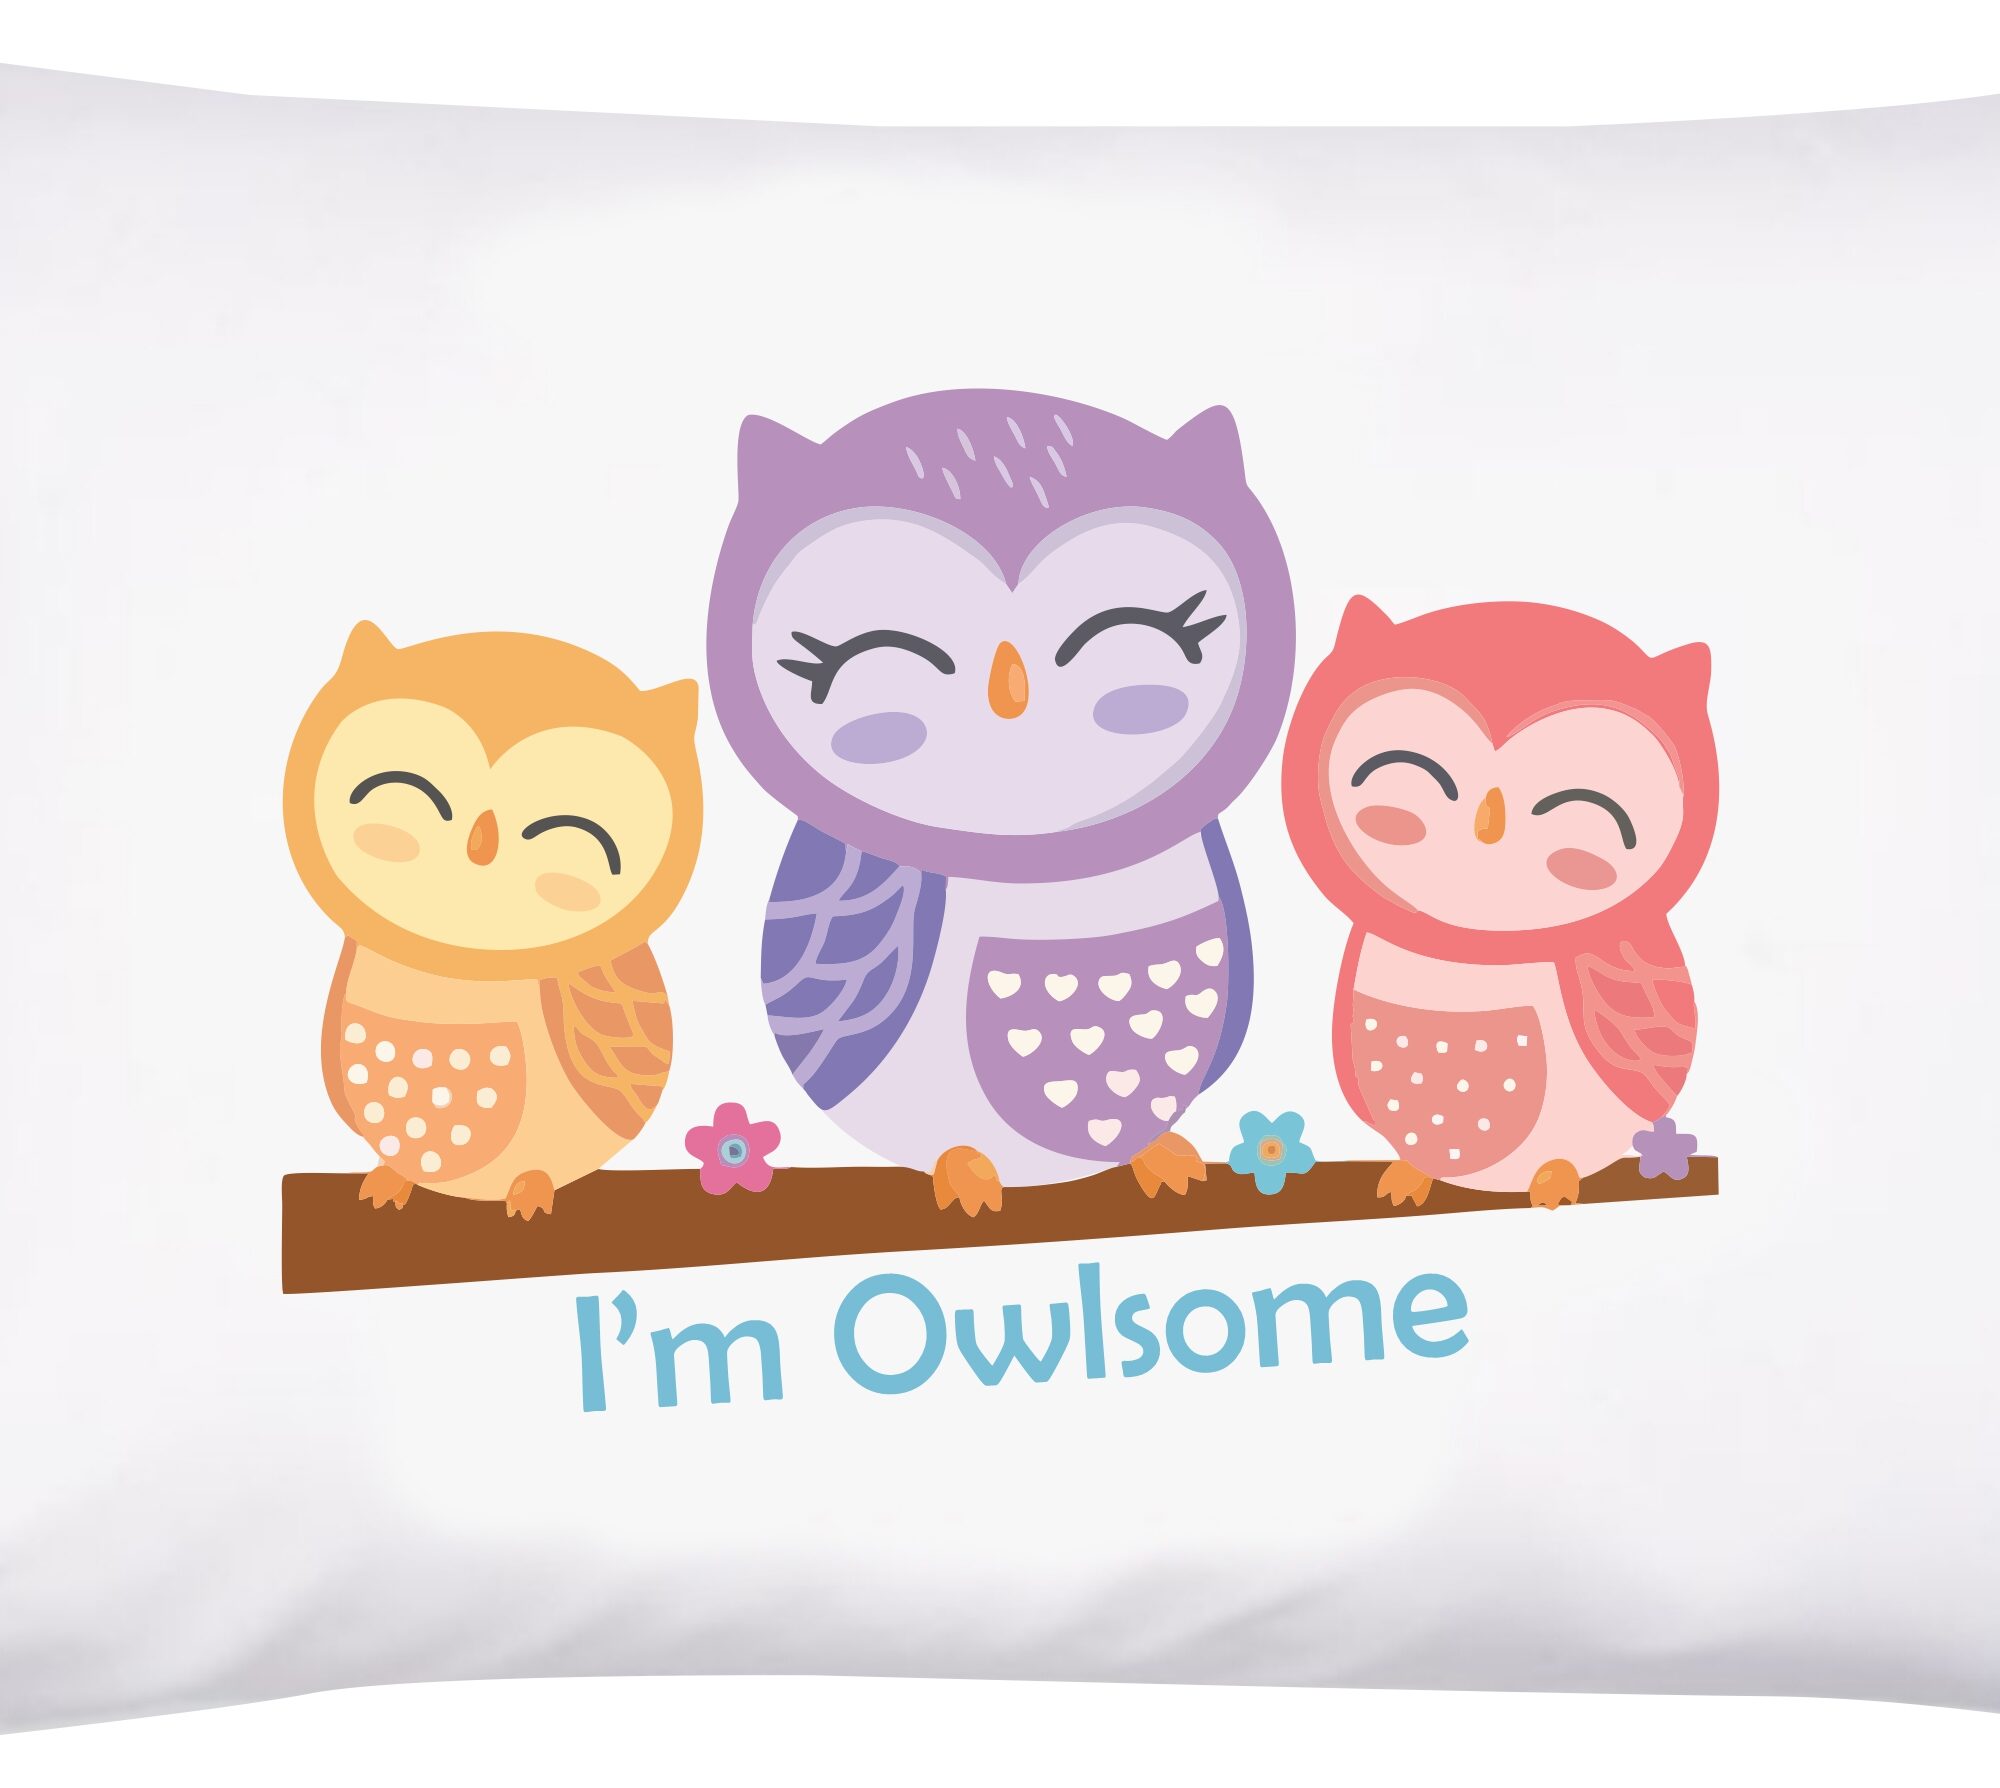 Pikkaboo Pillowcase Cover for Kids - Owl